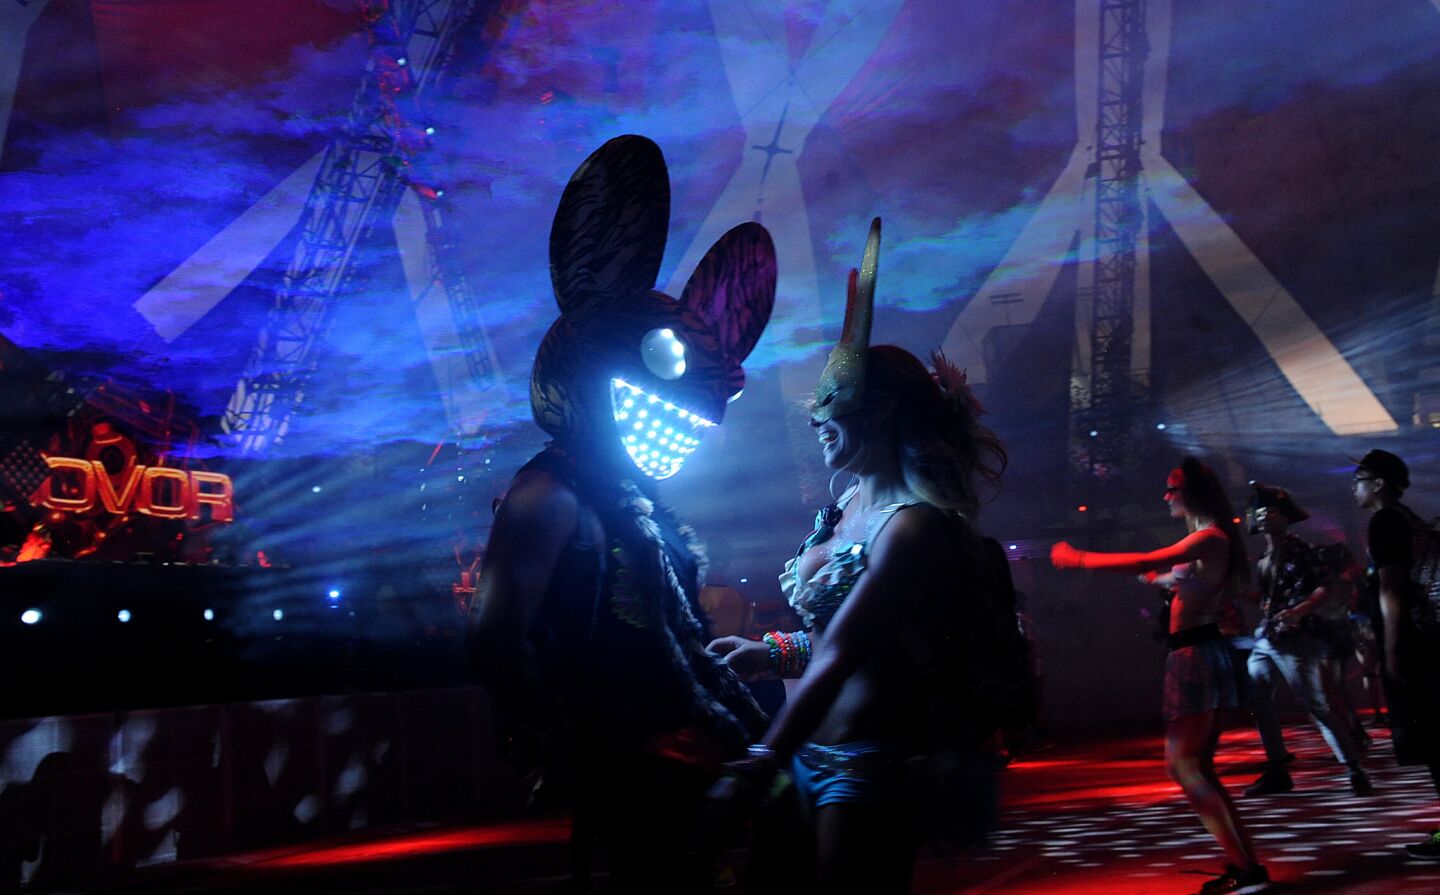 A young couple dances inside the Neon Garden during the Electric Daisy Carnival in Las Vegas on June 17.